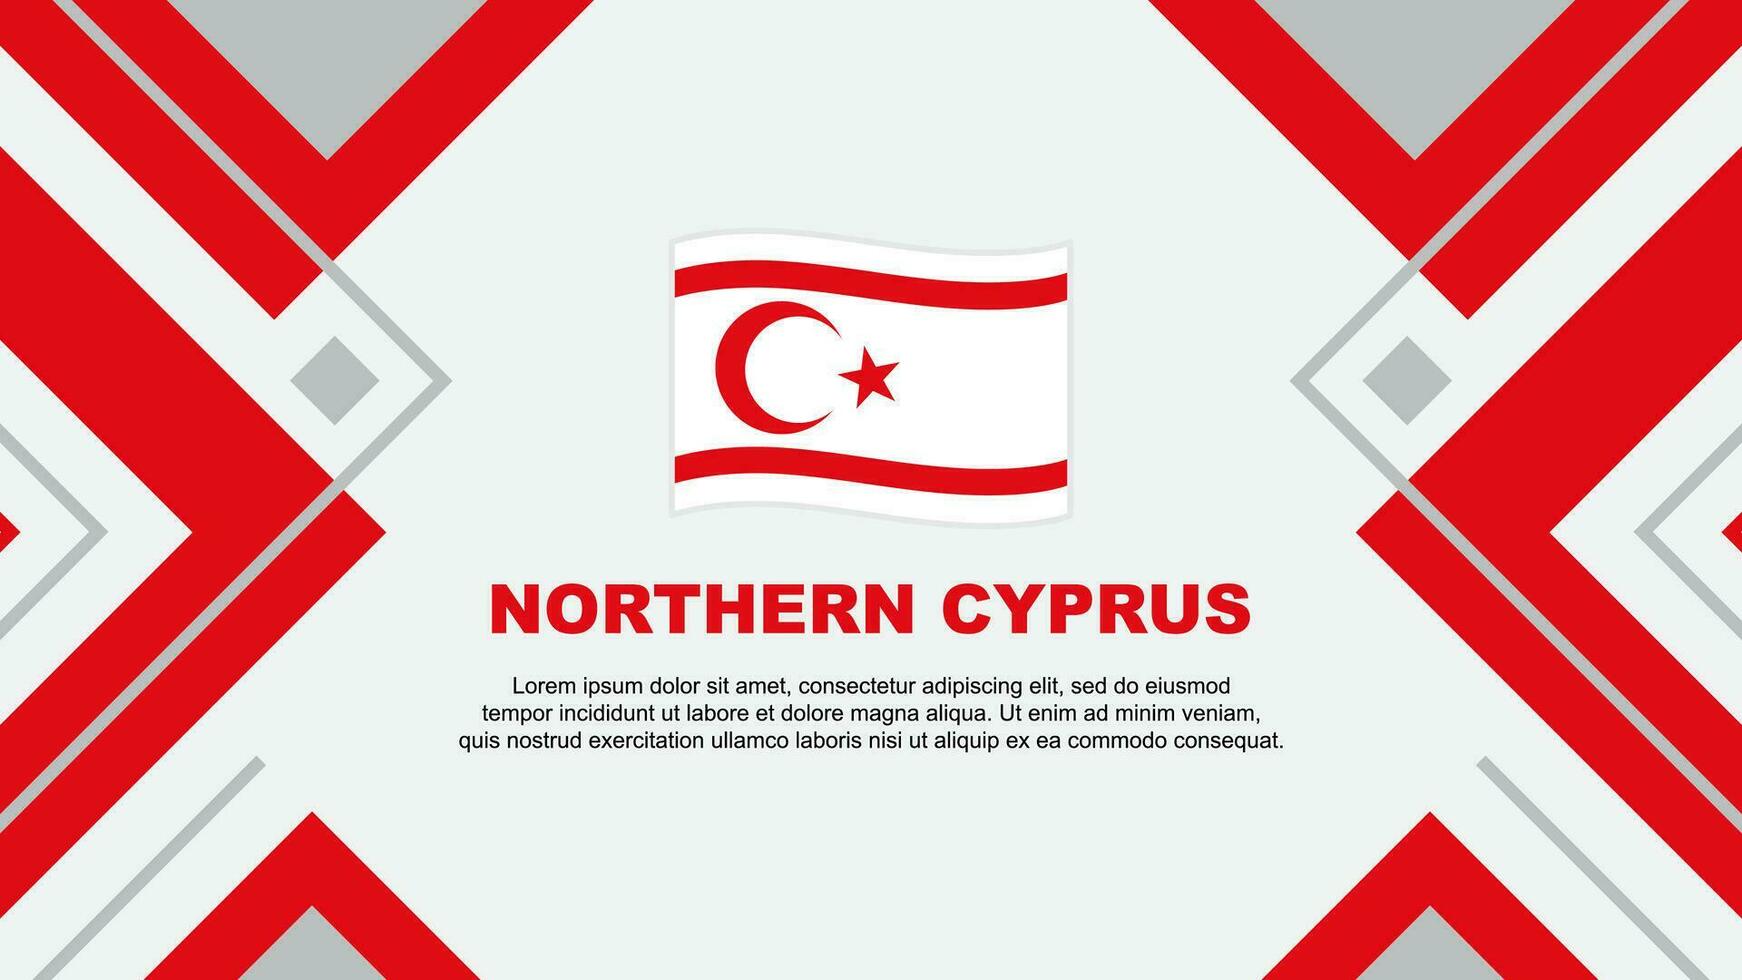 Northern Cyprus Flag Abstract Background Design Template. Northern Cyprus Independence Day Banner Wallpaper Vector Illustration. Northern Cyprus Illustration